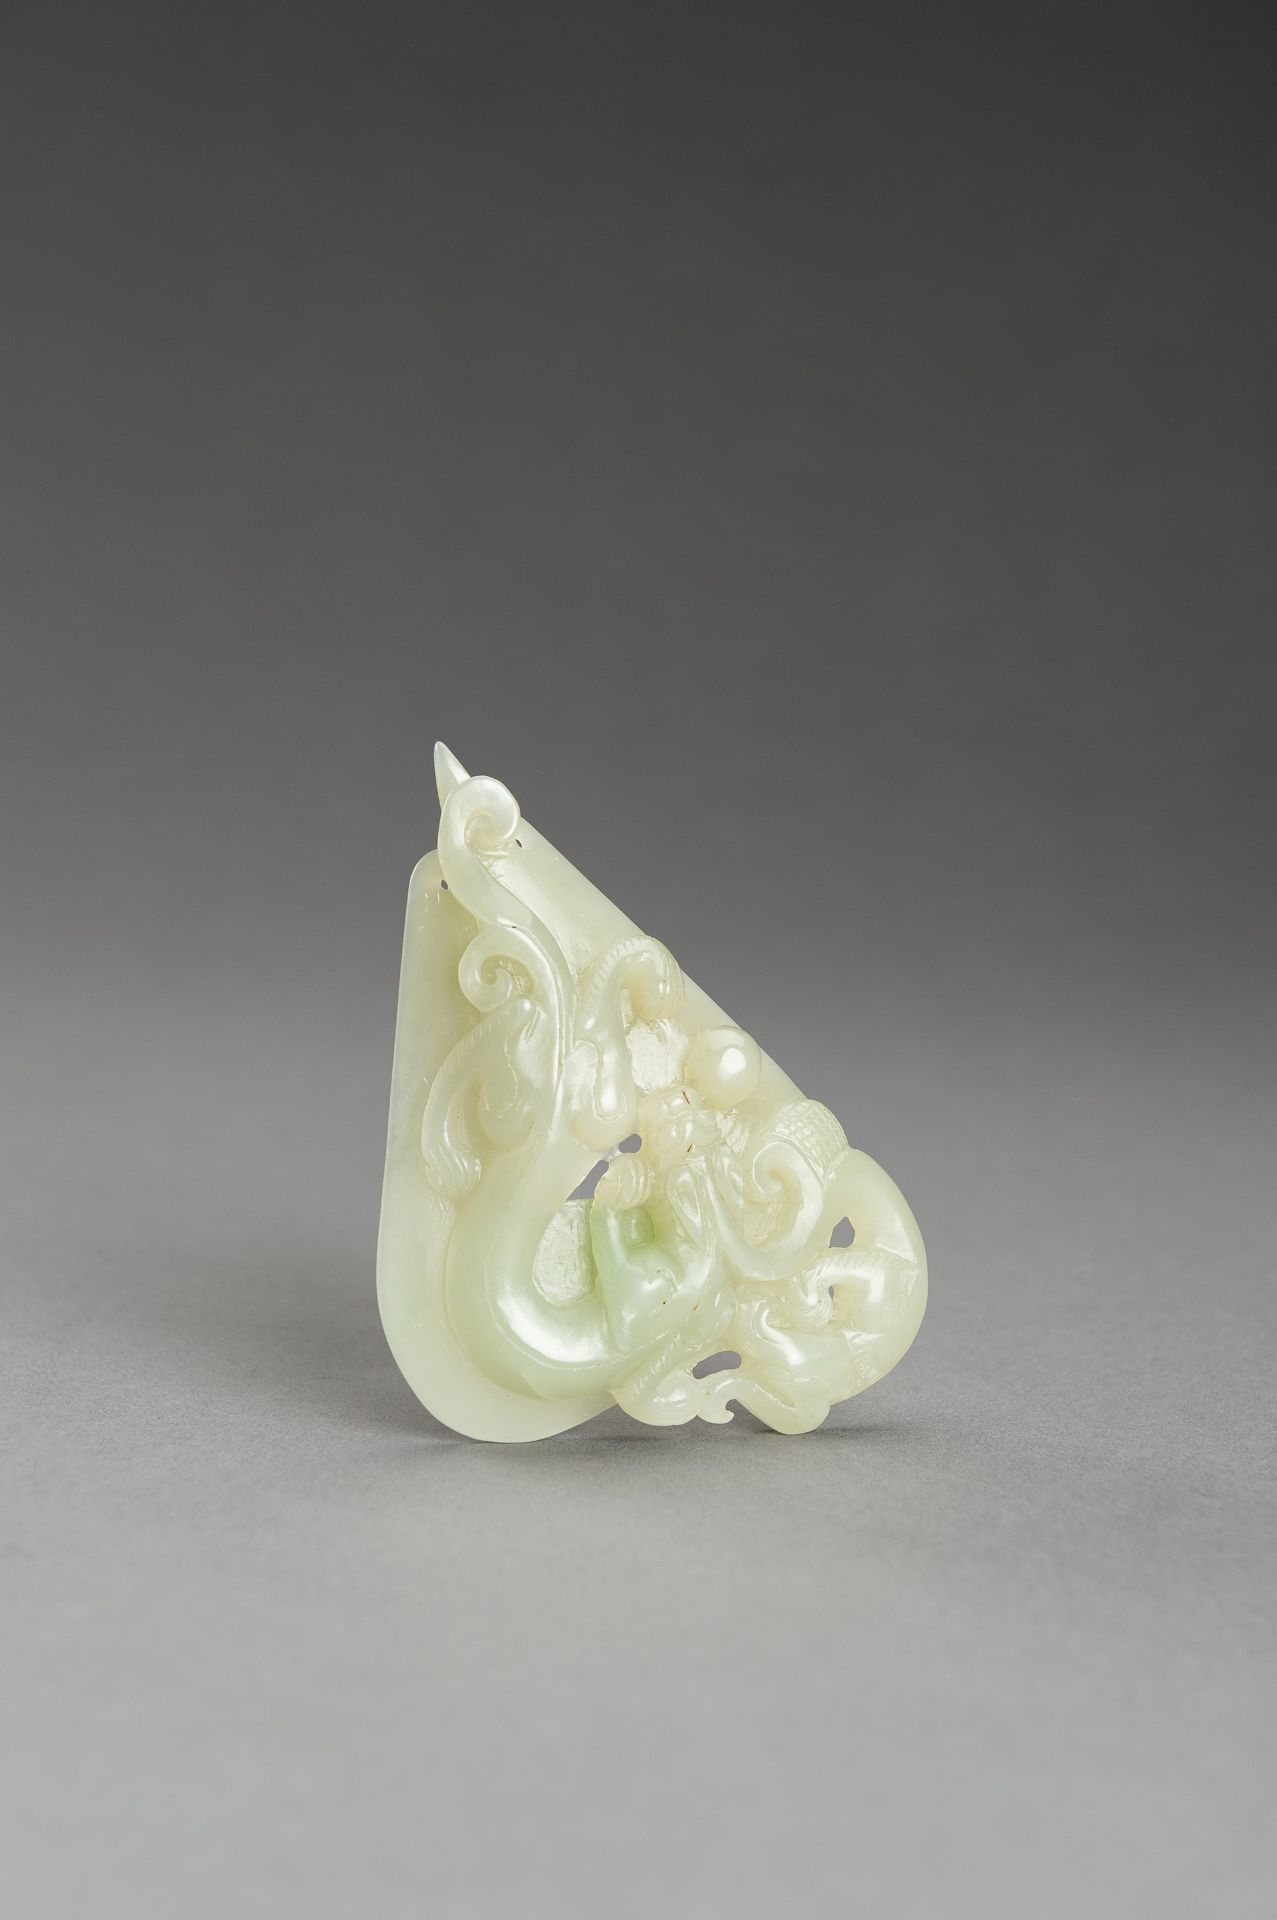 AN ARCHAISTIC PALE CELADON JADE PENDANT OF A CHILONG, 1920s - Image 13 of 14